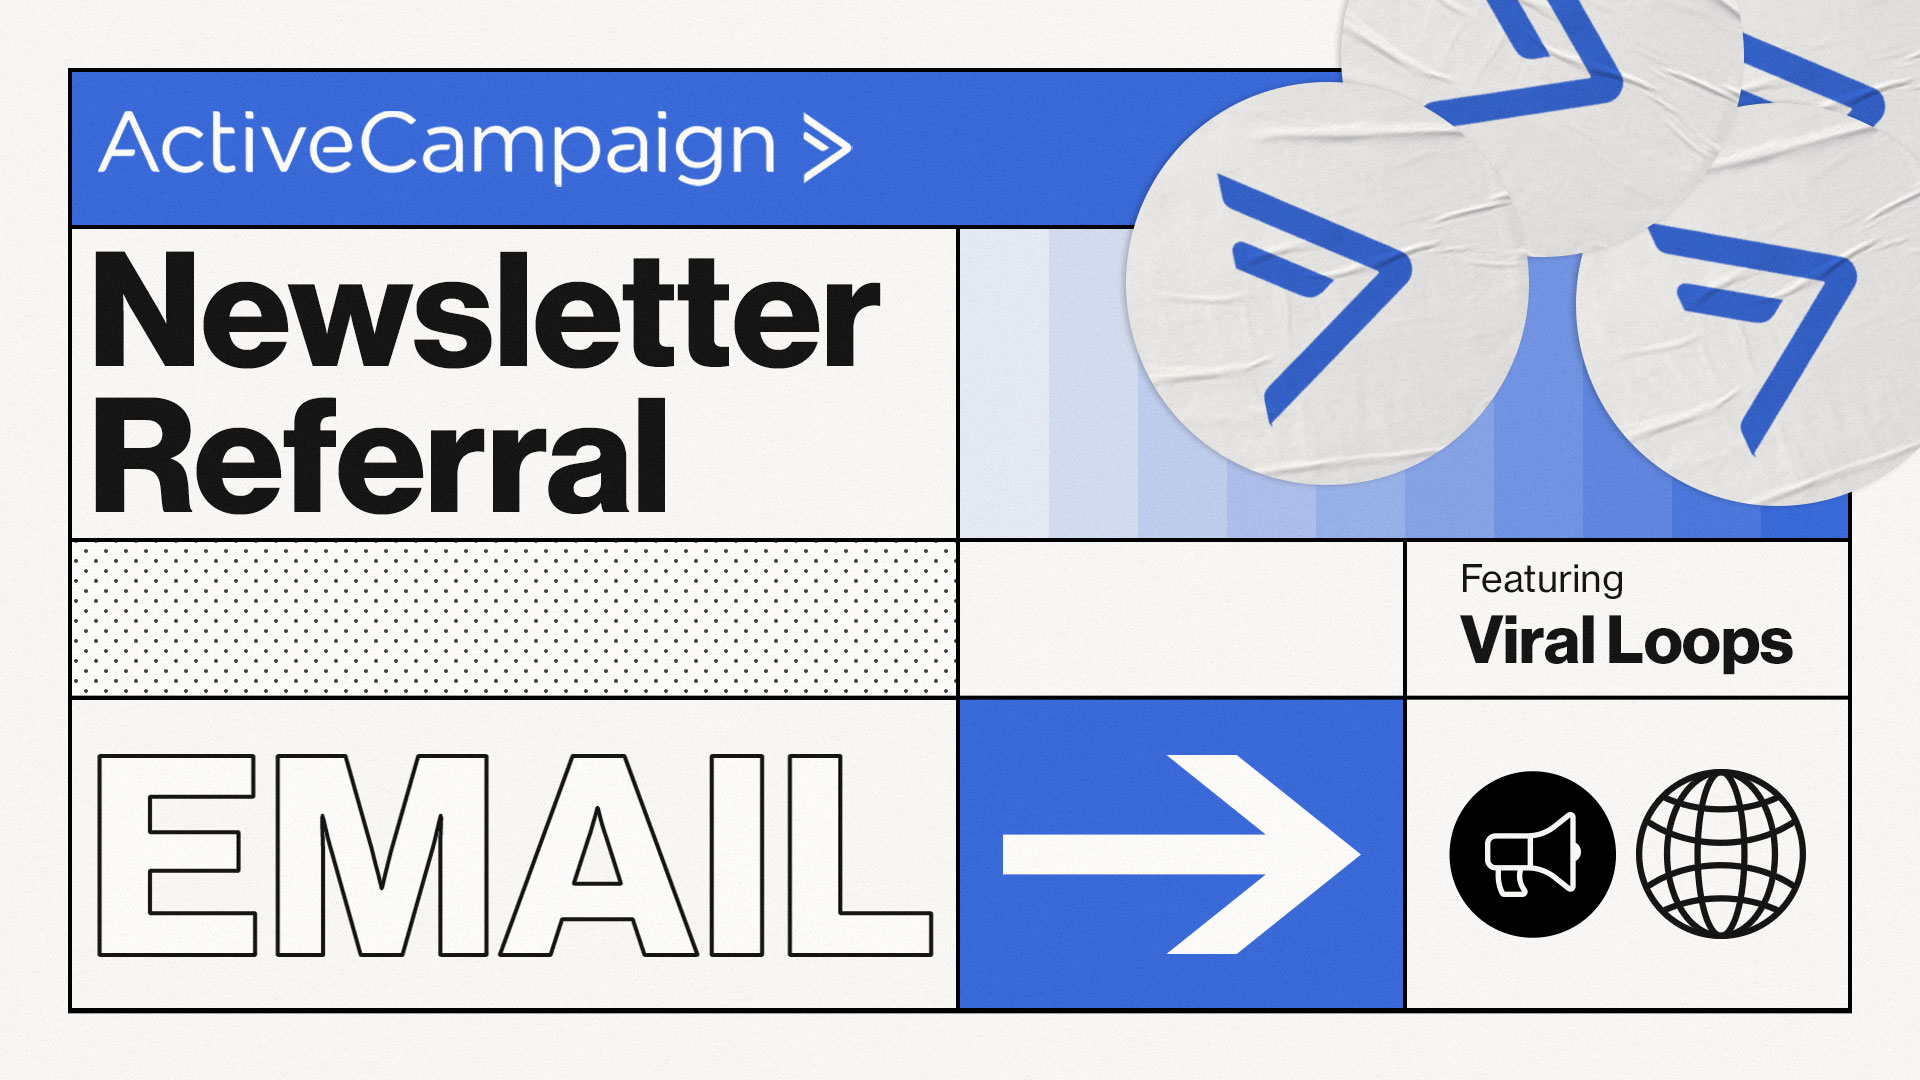 How to build a newsletter referral program with ActiveCampaign